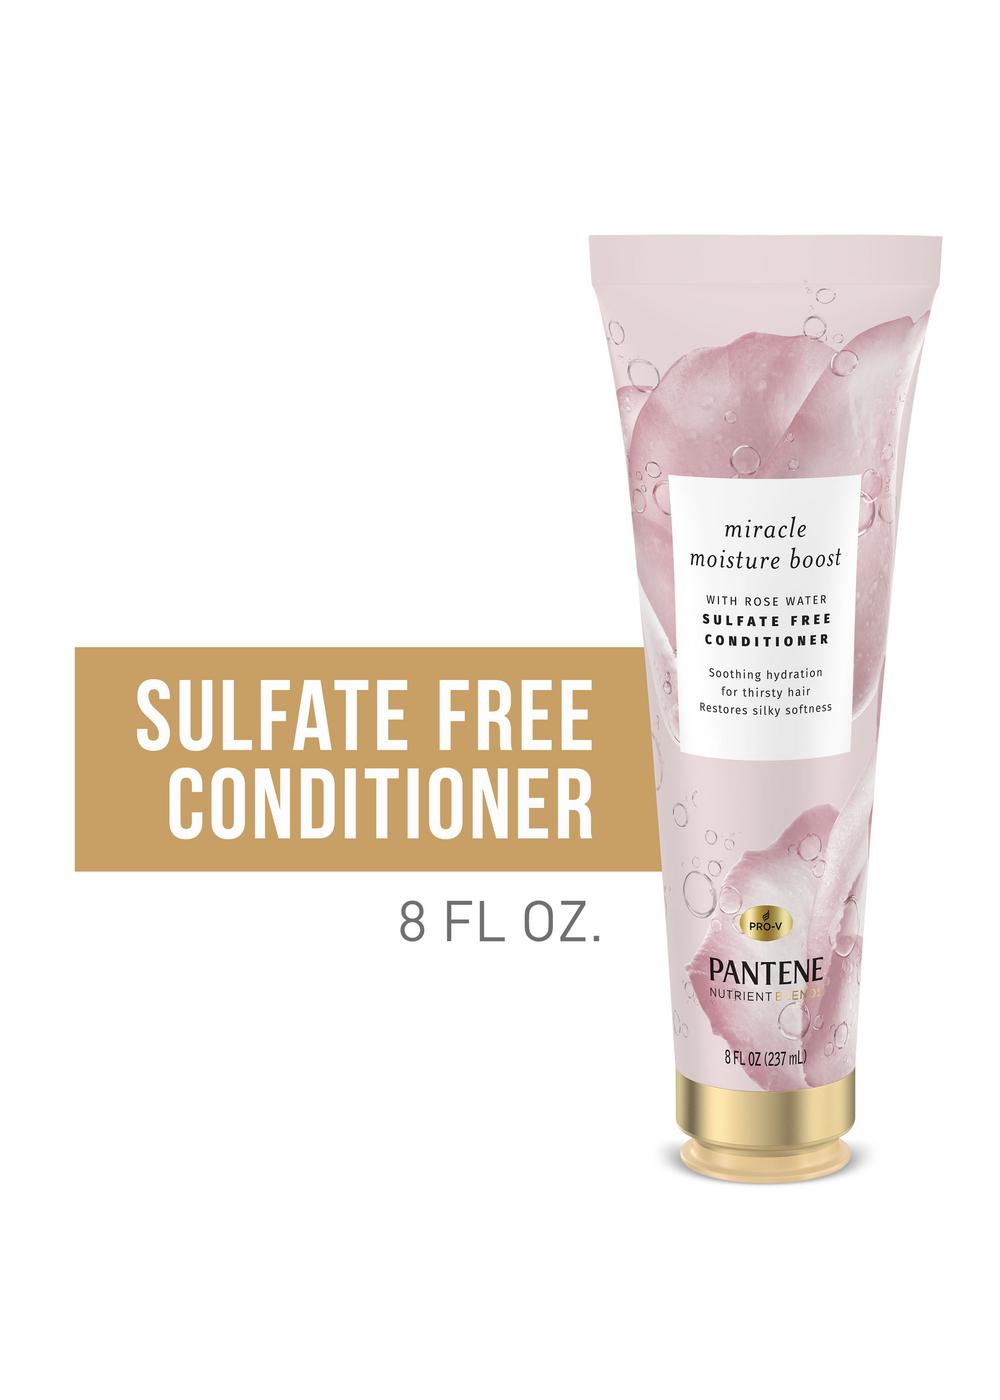 Pantene Pro-V Nutrient Blends Miracle Moisture Boost Conditioner; image 8 of 10